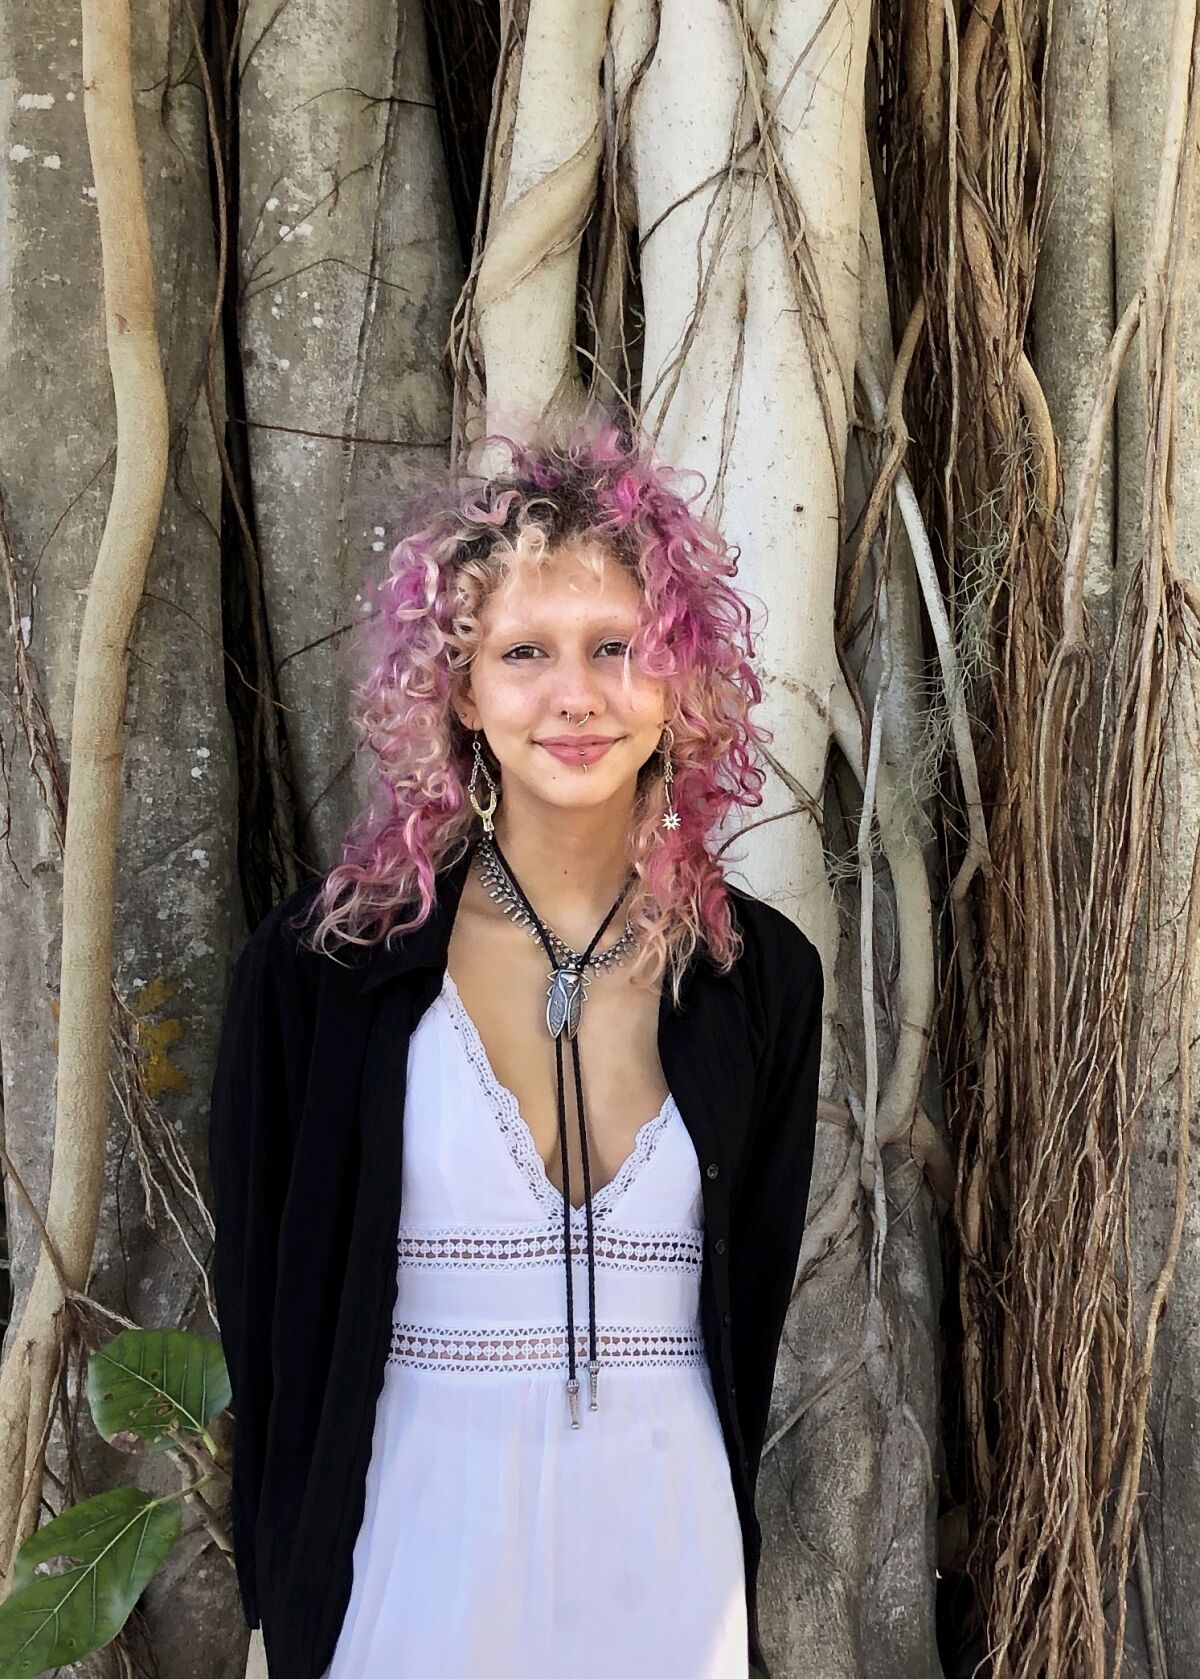 A young person with curly pink hair, wears a white dress and a black cardigan, smiles while posing in front of a large tree. 